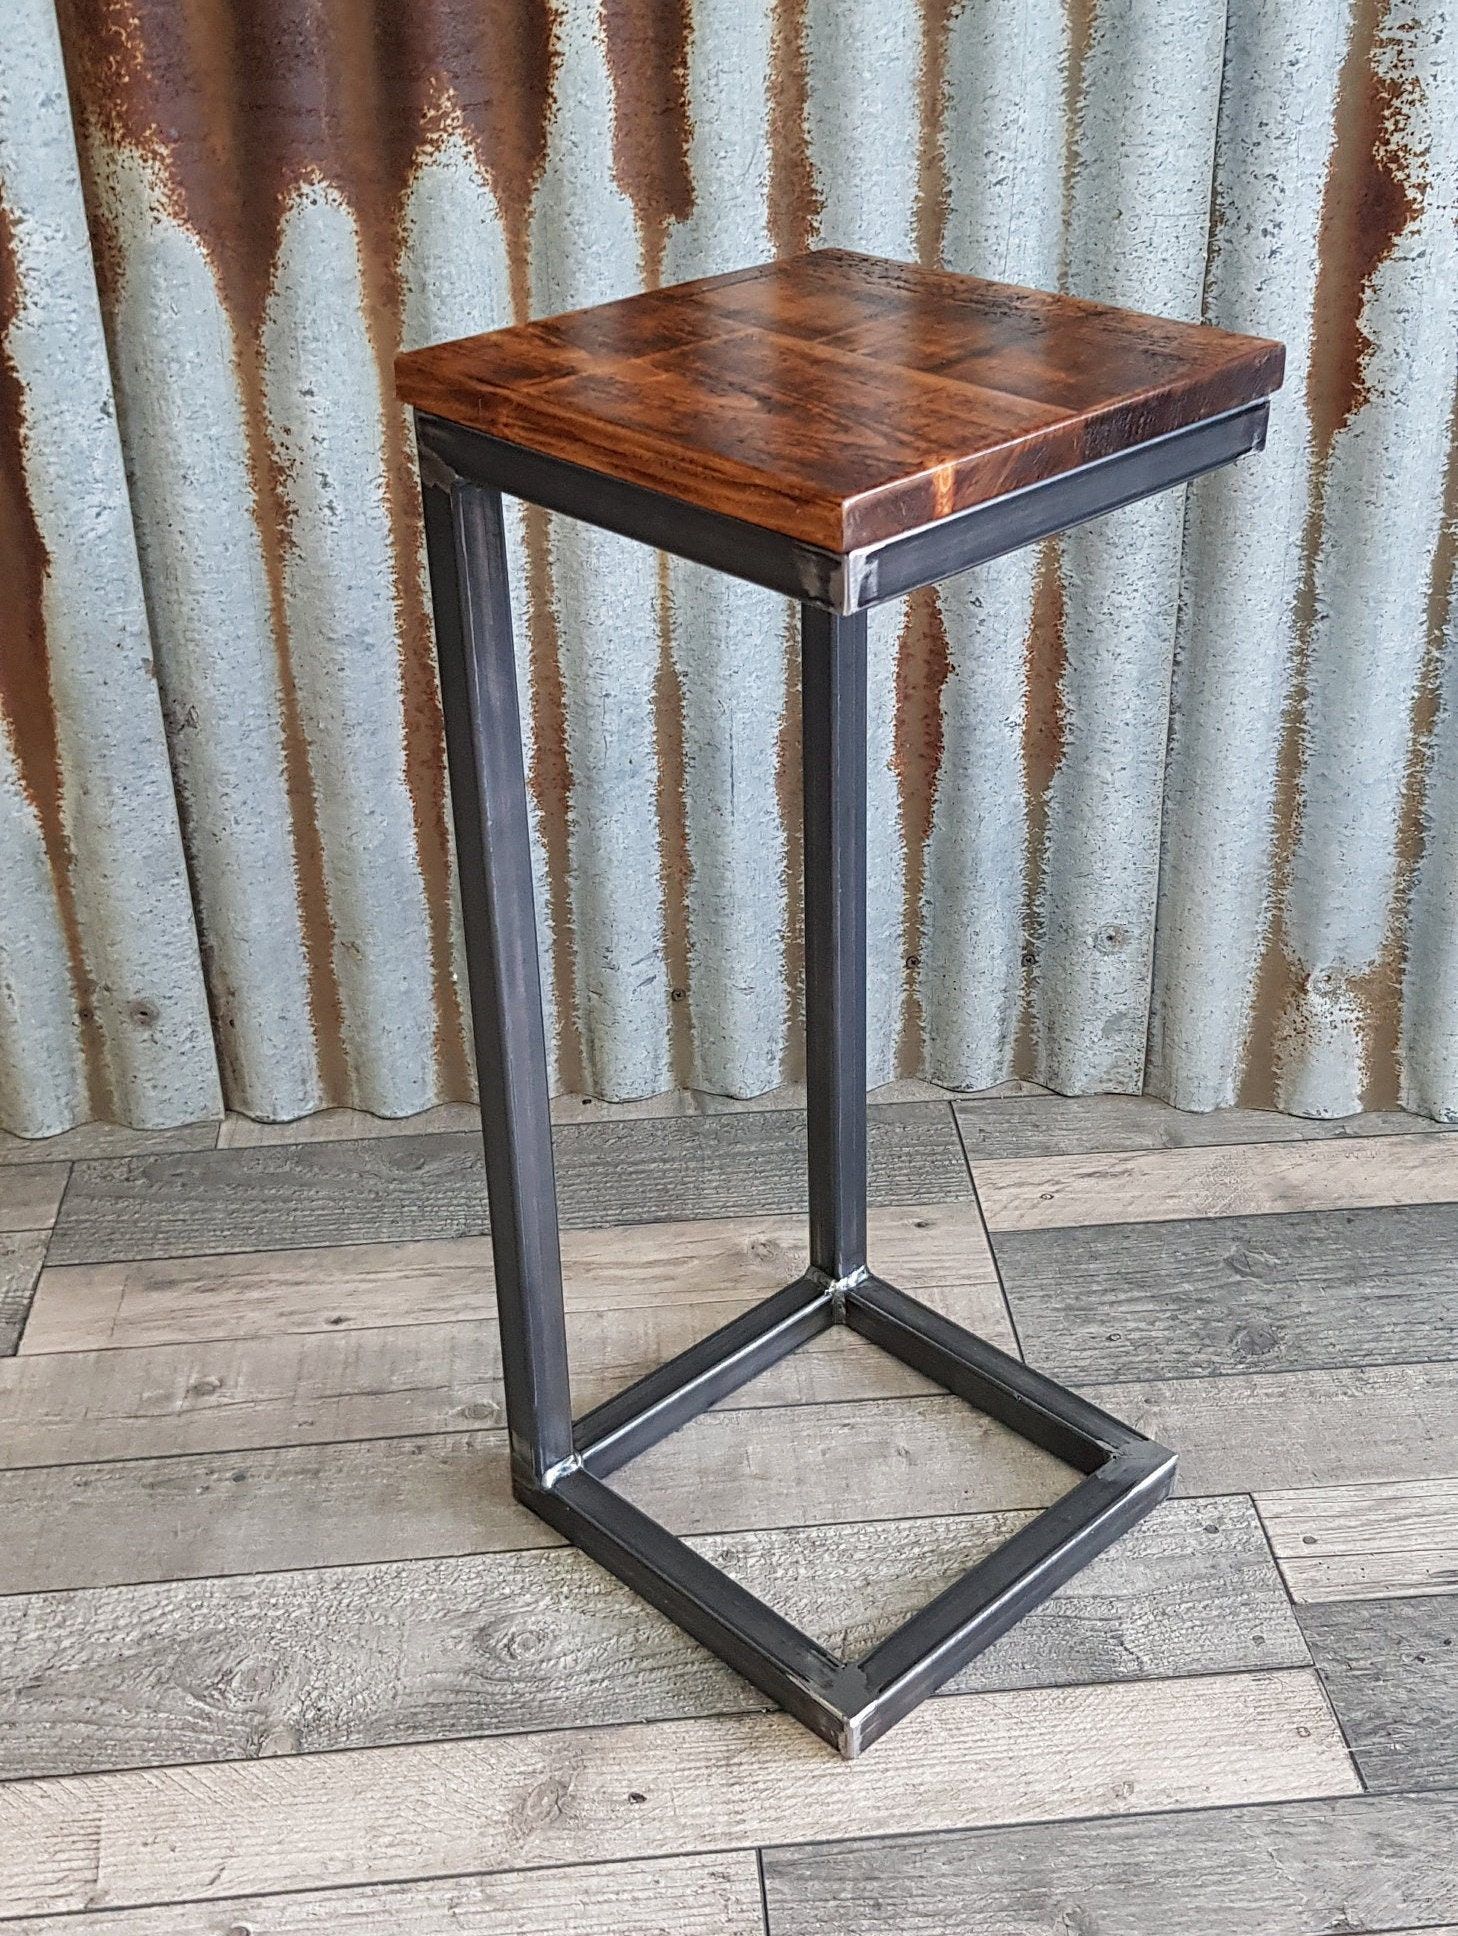 Rustic Industrial Sofa Side Table, Wooden C Shaped Lap Table, Bespoke Regarding Barnside Round Console Tables (View 4 of 20)